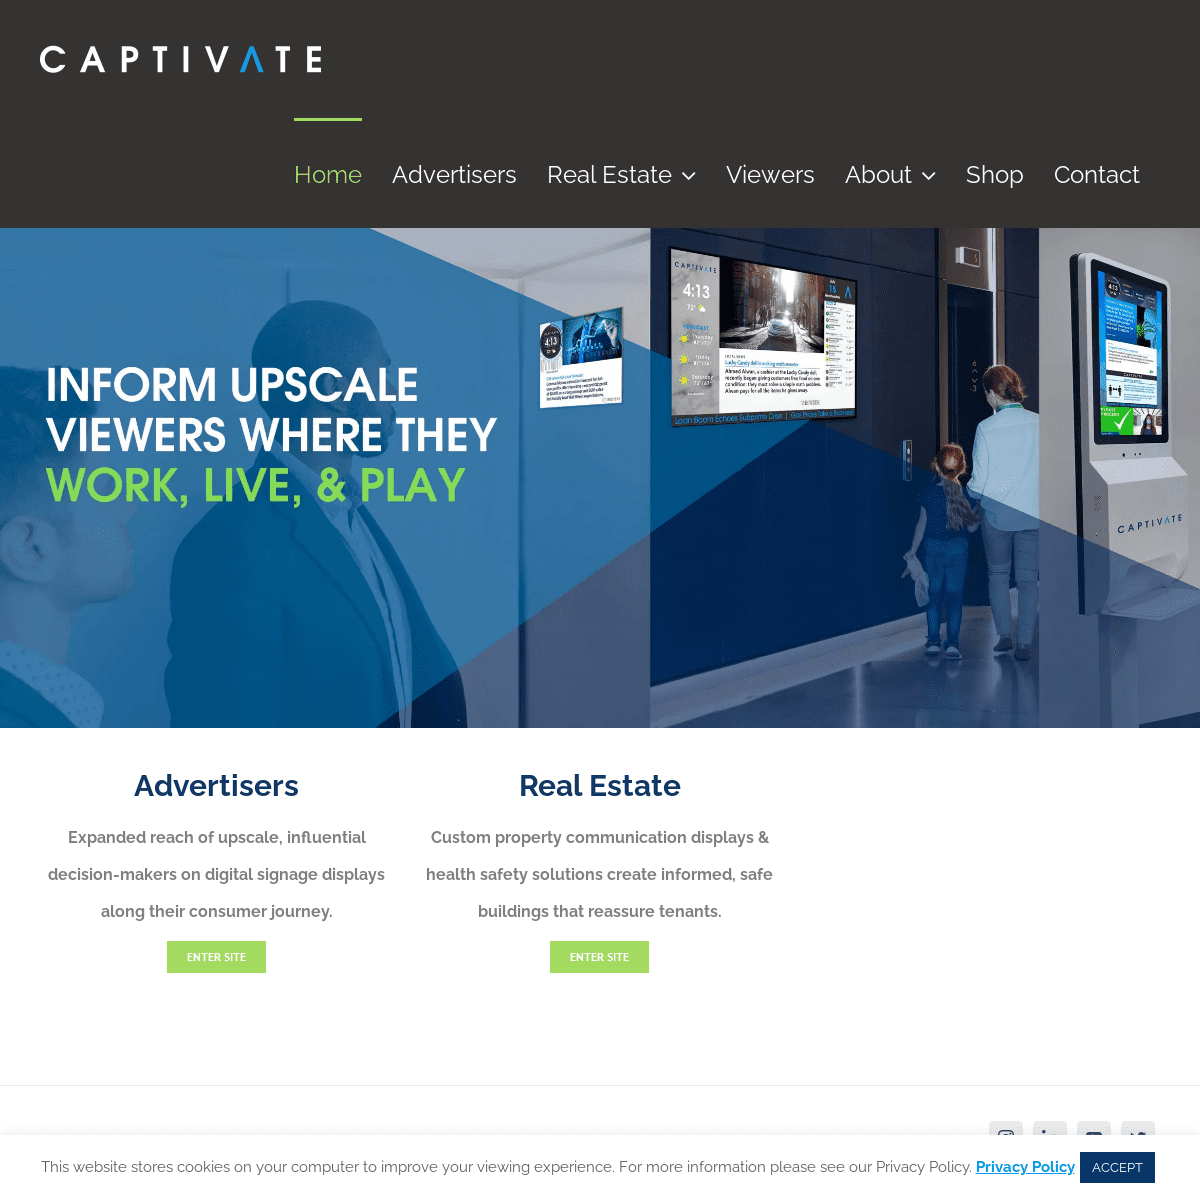 A complete backup of https://captivate.com